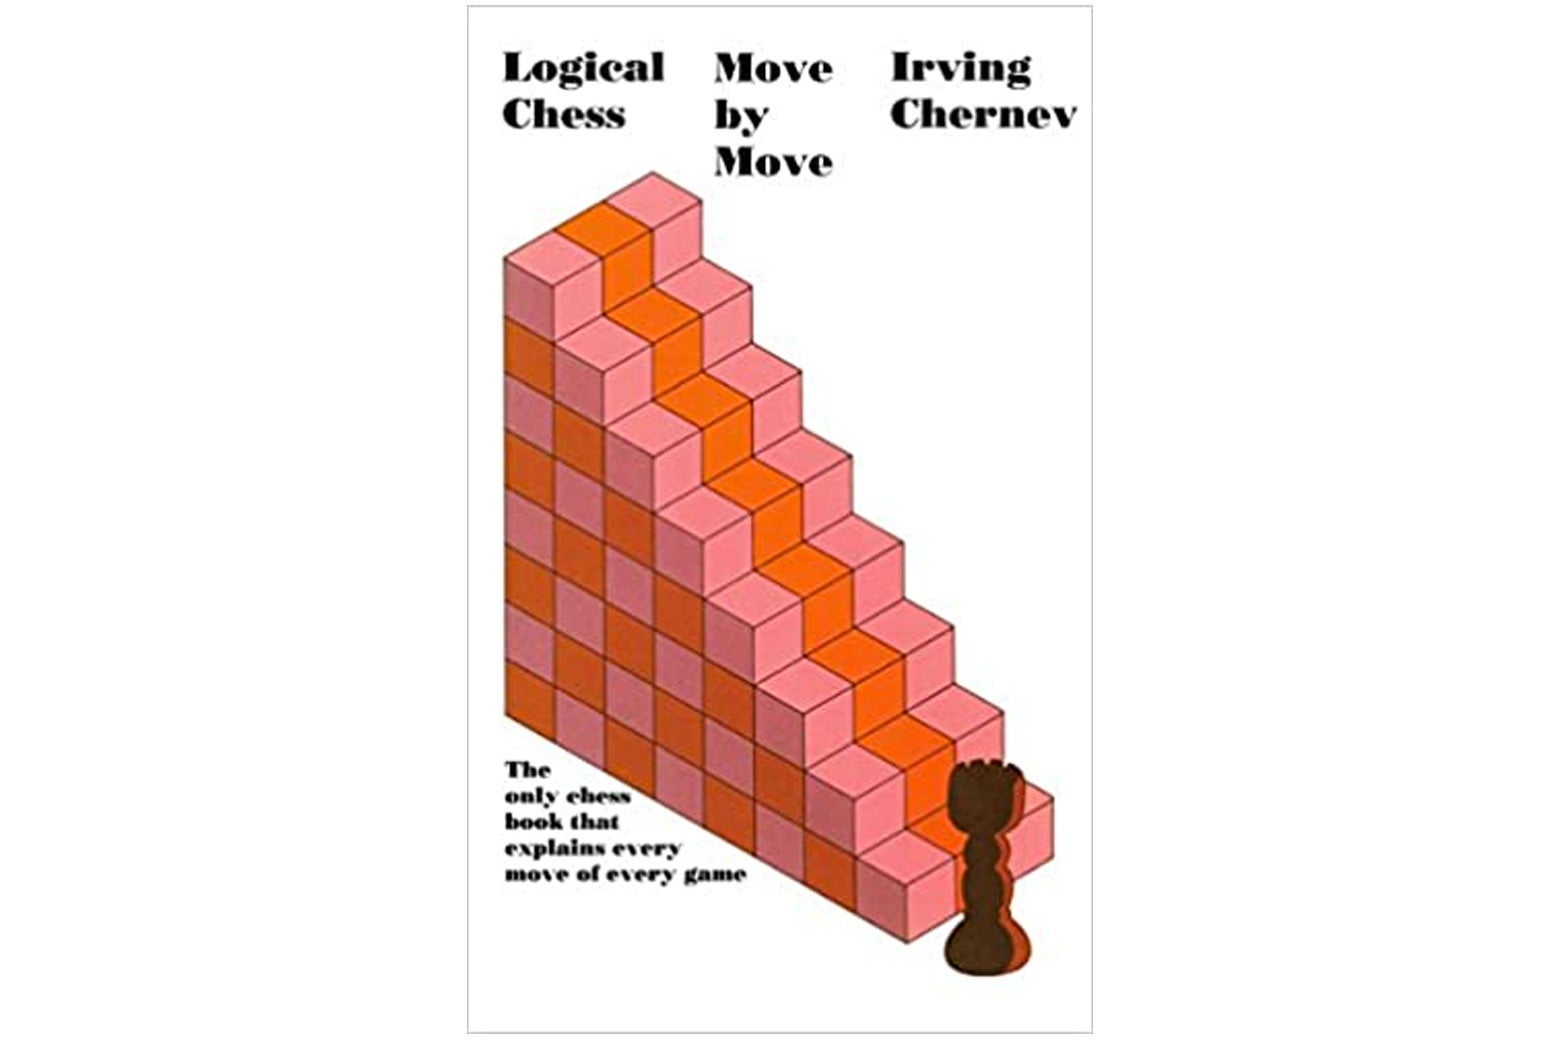 Logical Chess, Move by Move book jacket